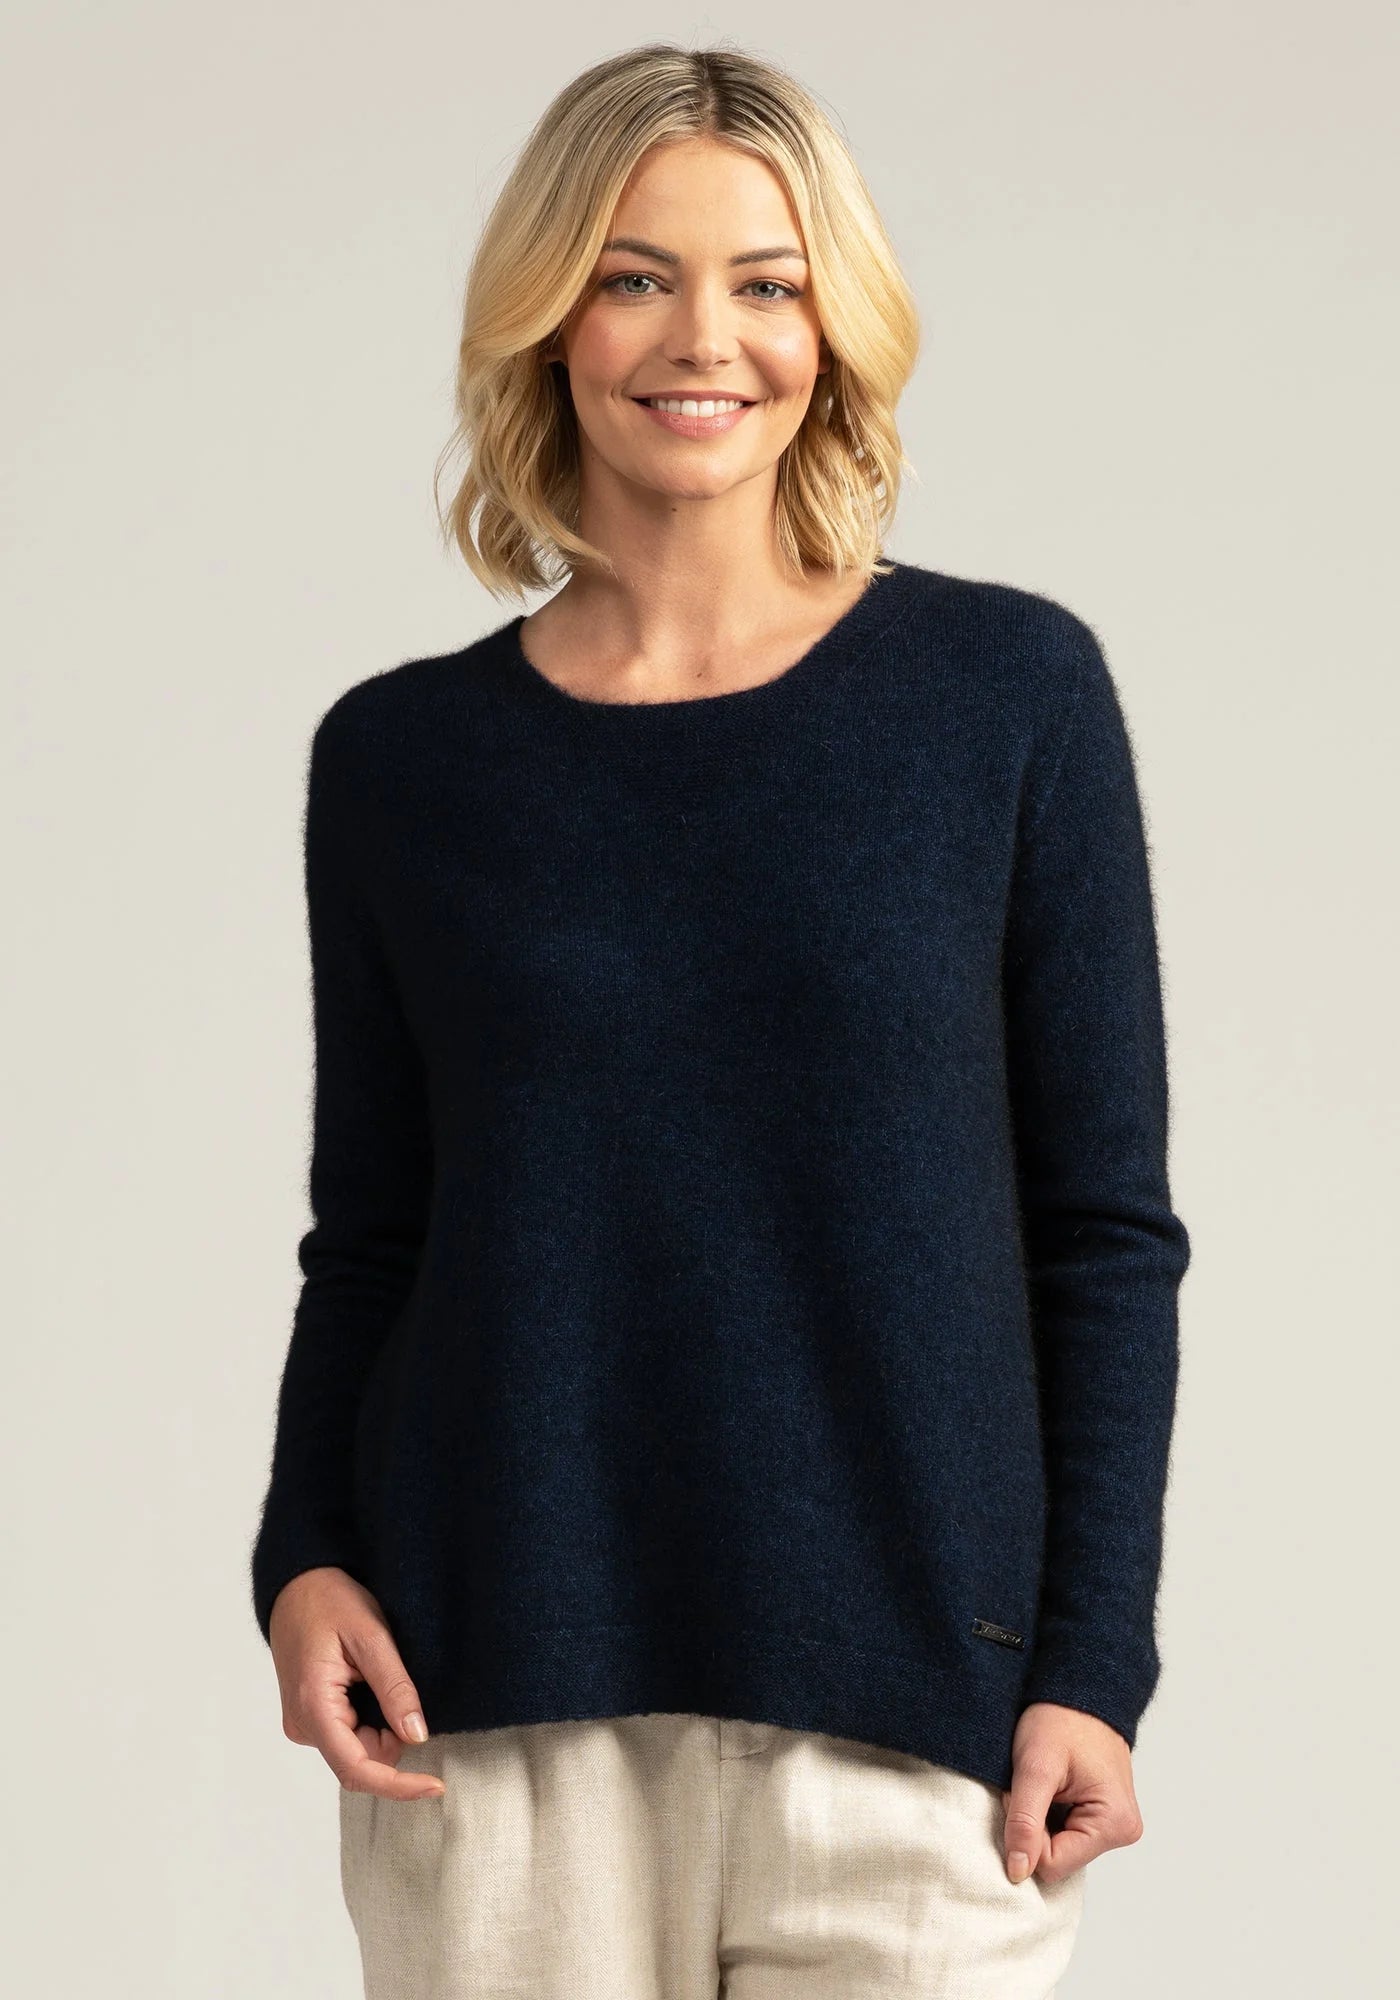 Experience ultimate comfort with our navy blue merino wool sweater. Soft, breathable, and stylish—your new wardrobe essential. Order yours today!